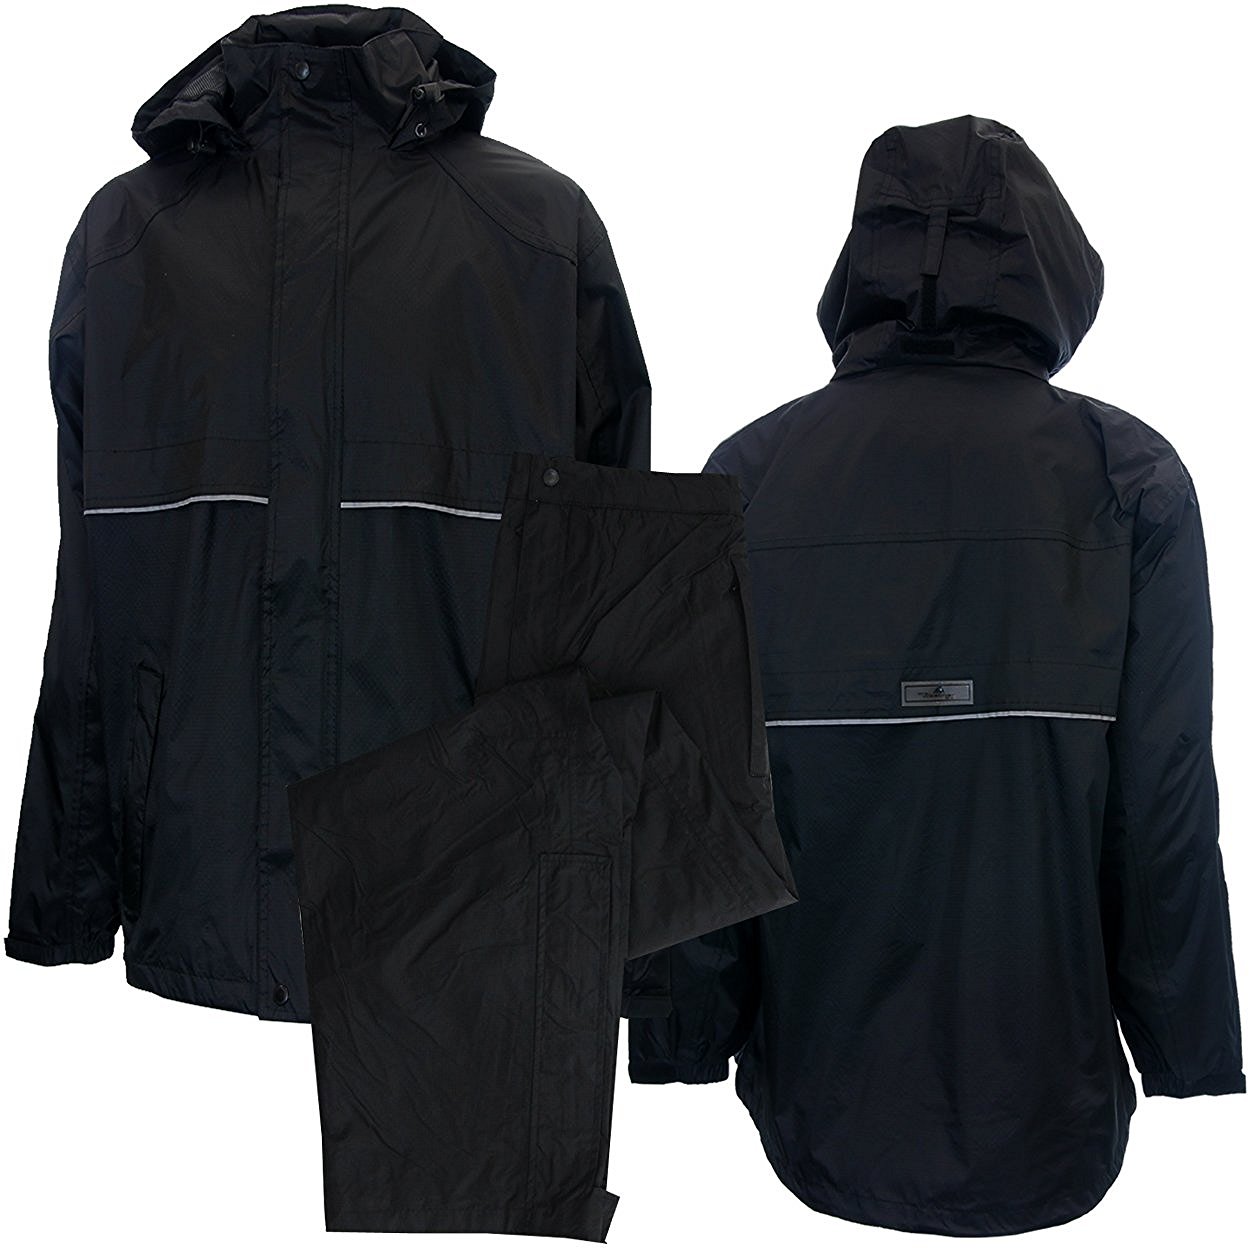 Mens The Weather Company Golf Rain Suits